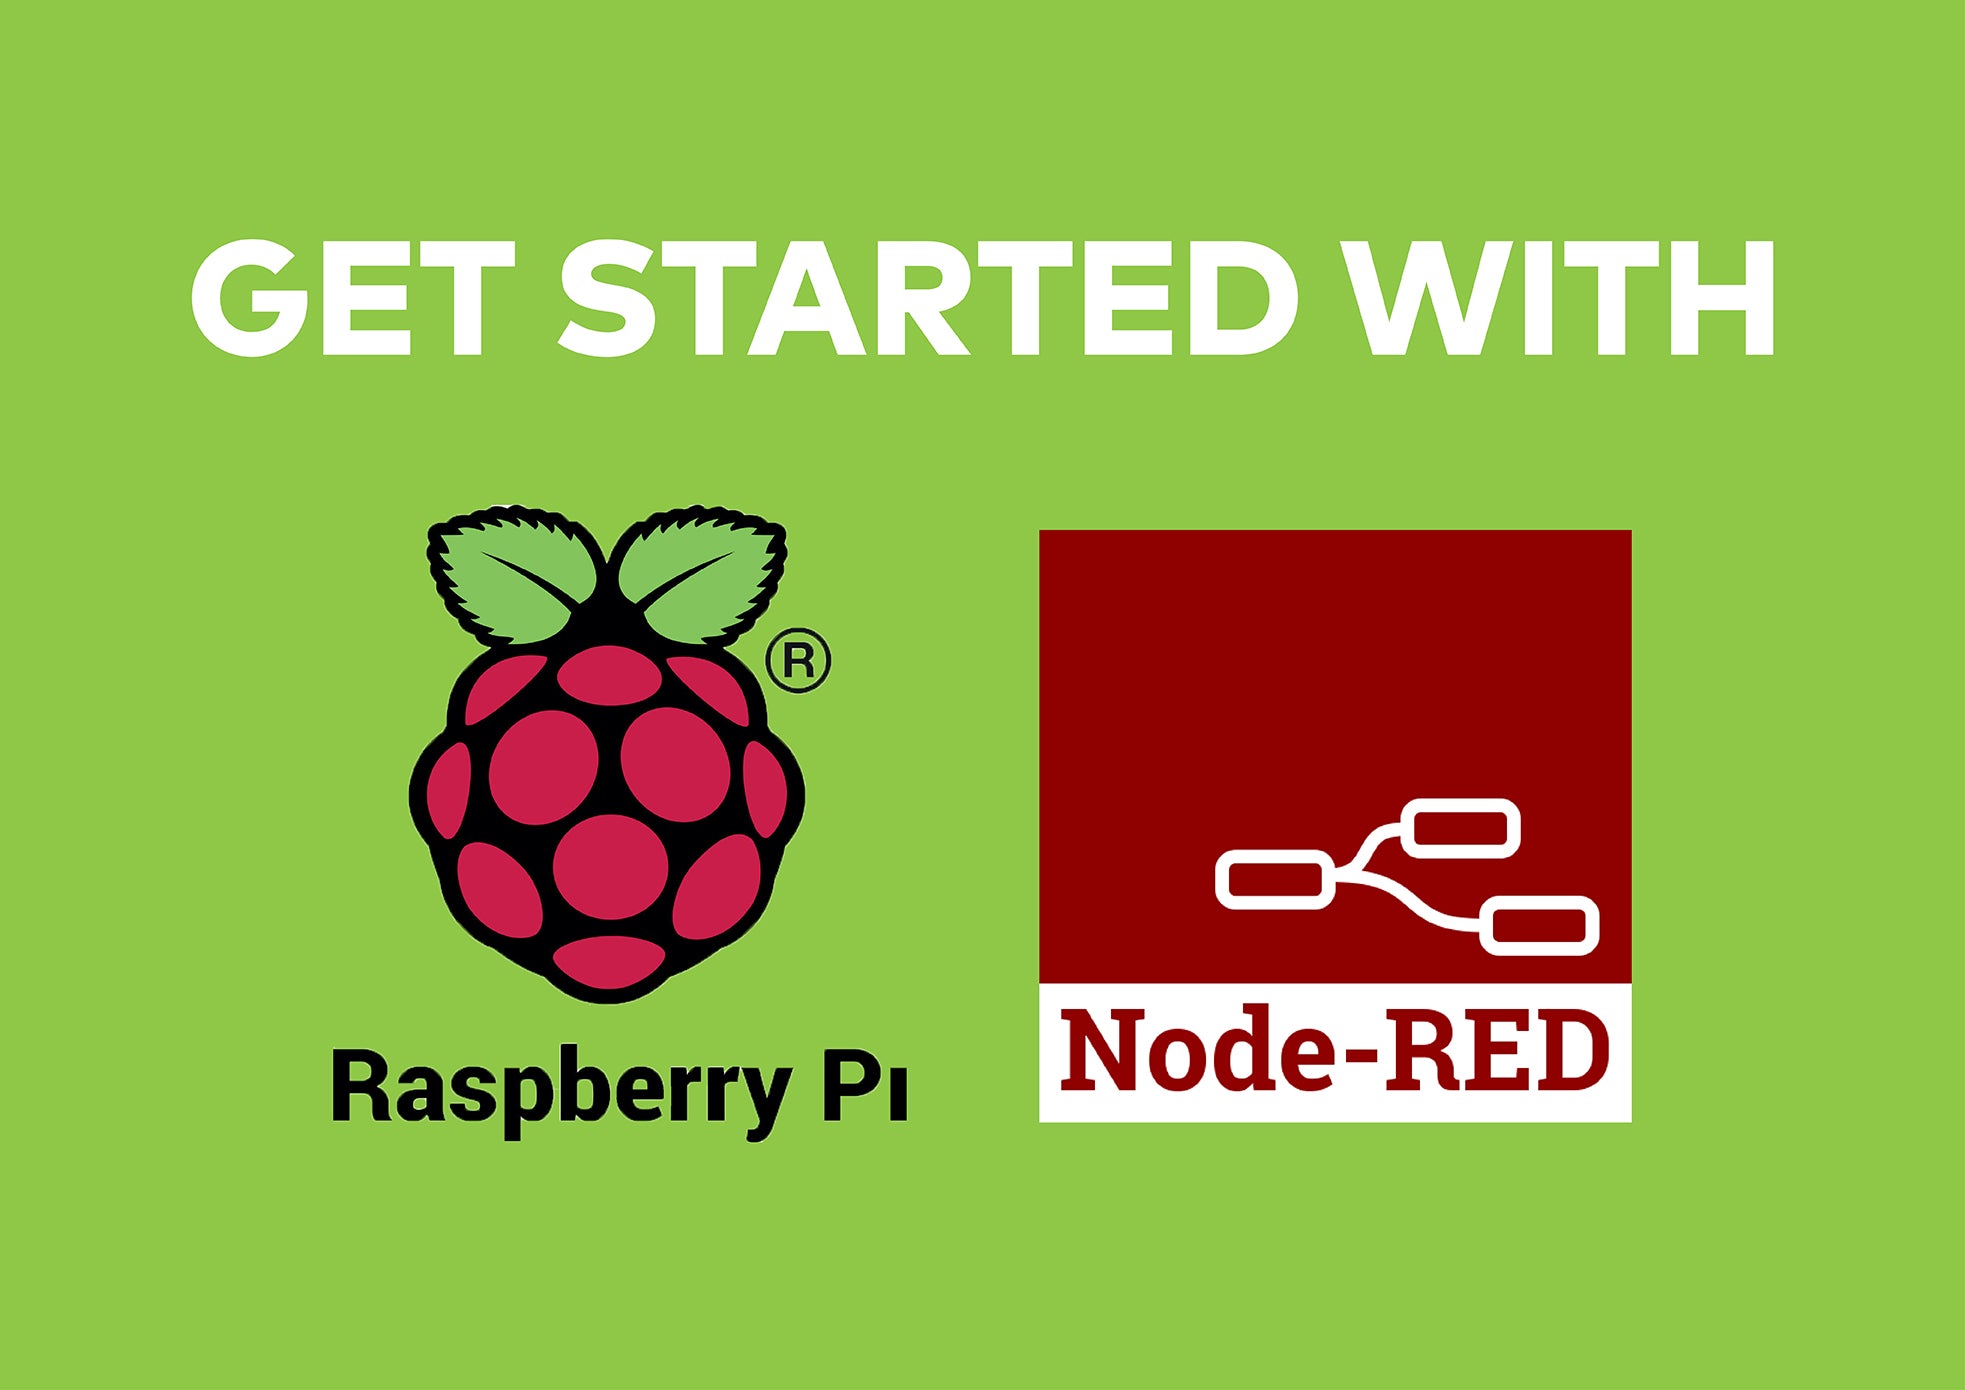 GET STARTED WITH RASPBERRY PI AND NODE-RED